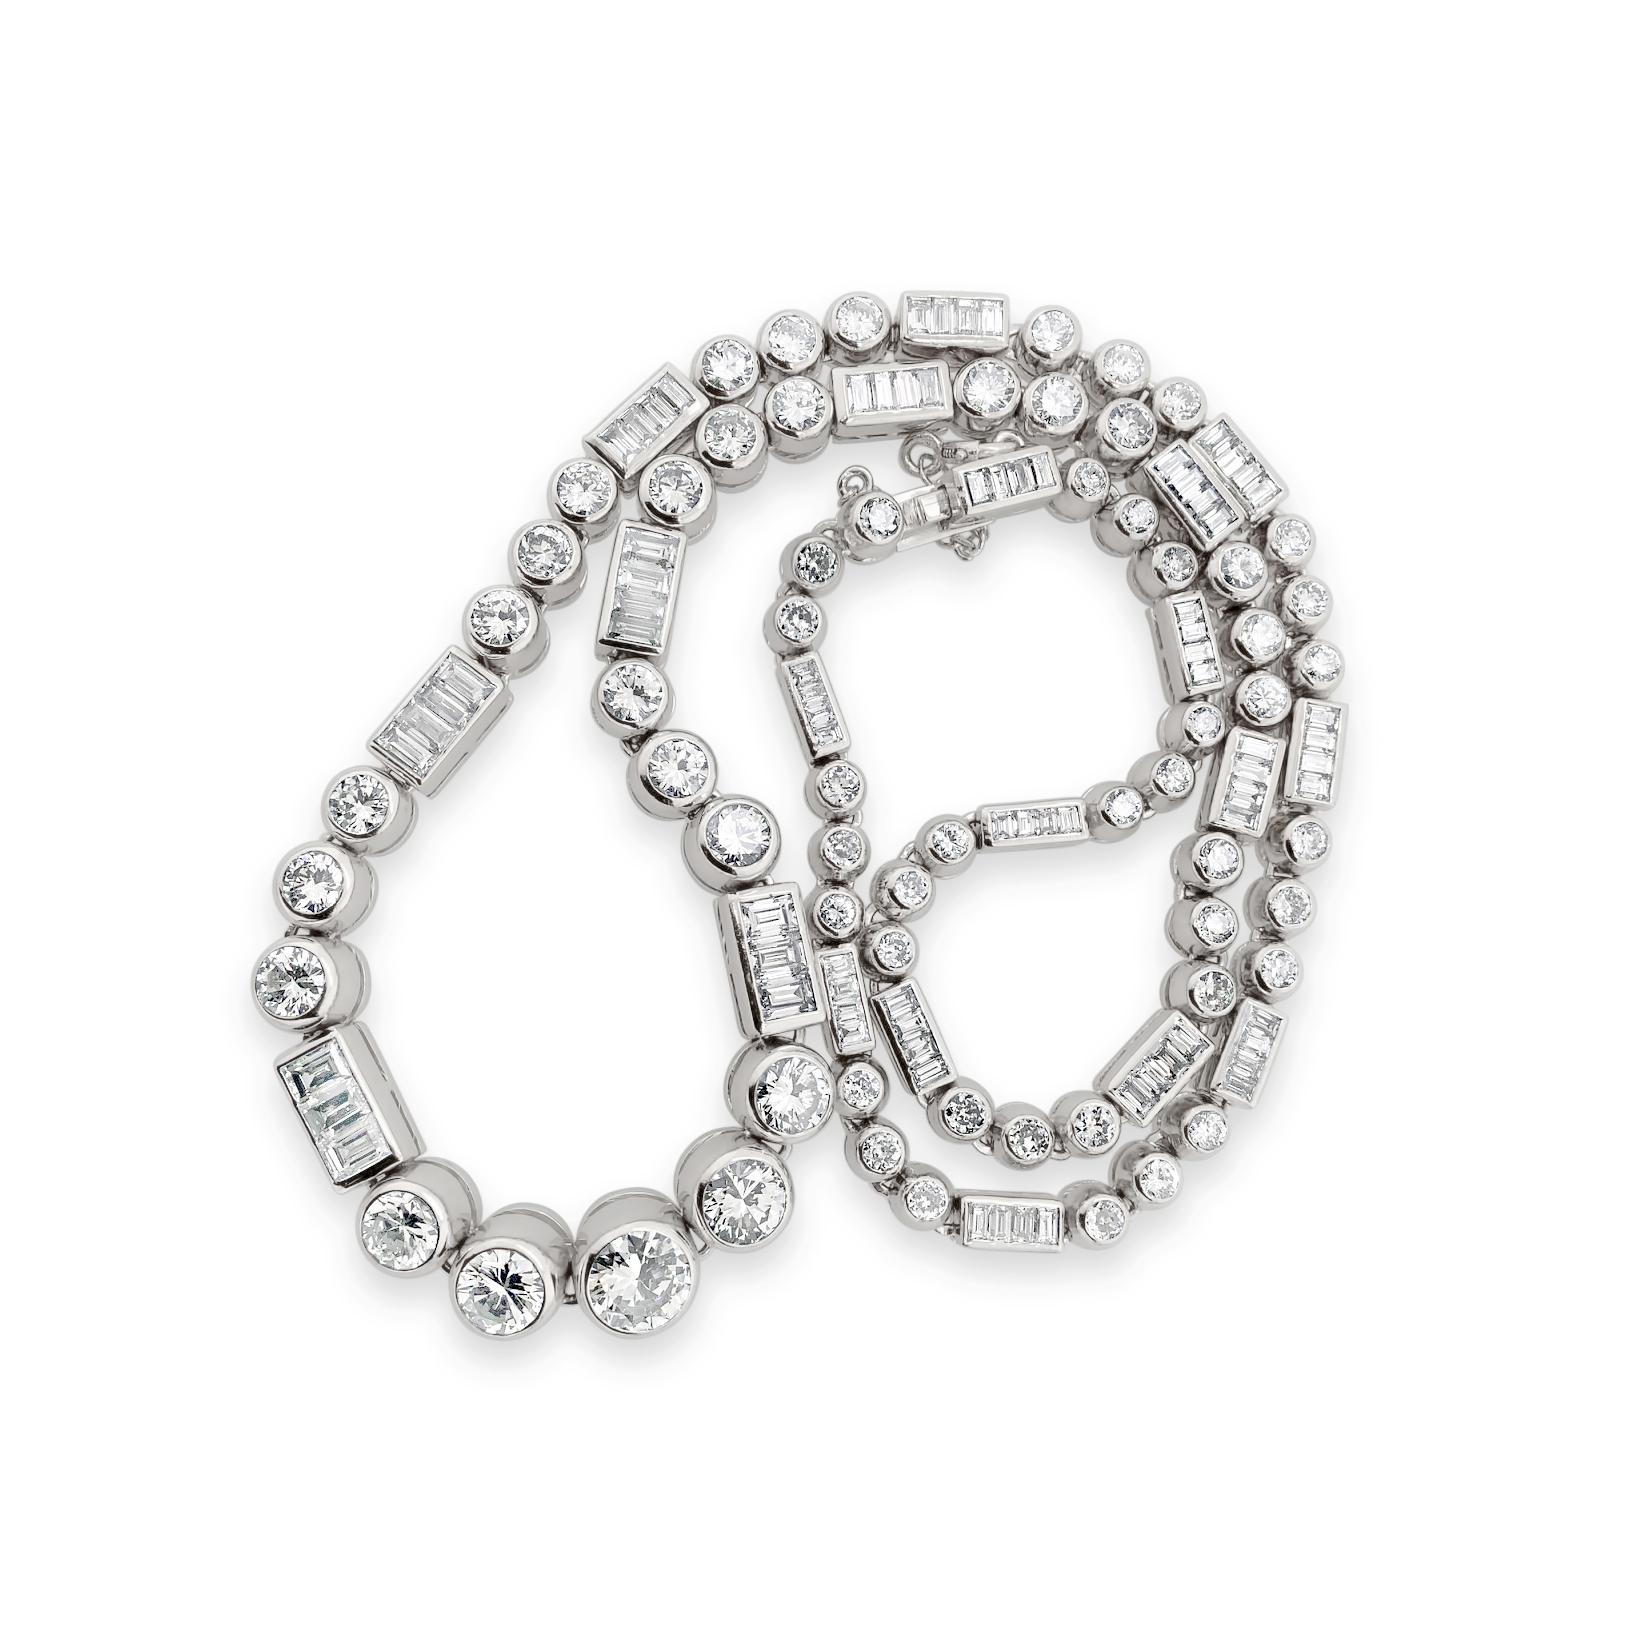 14.0 Carat (total weight) Round and Baguette Diamond Necklace set in Platinum, with a Platinum Barrel Clasp and Safety Chain. Length is 16